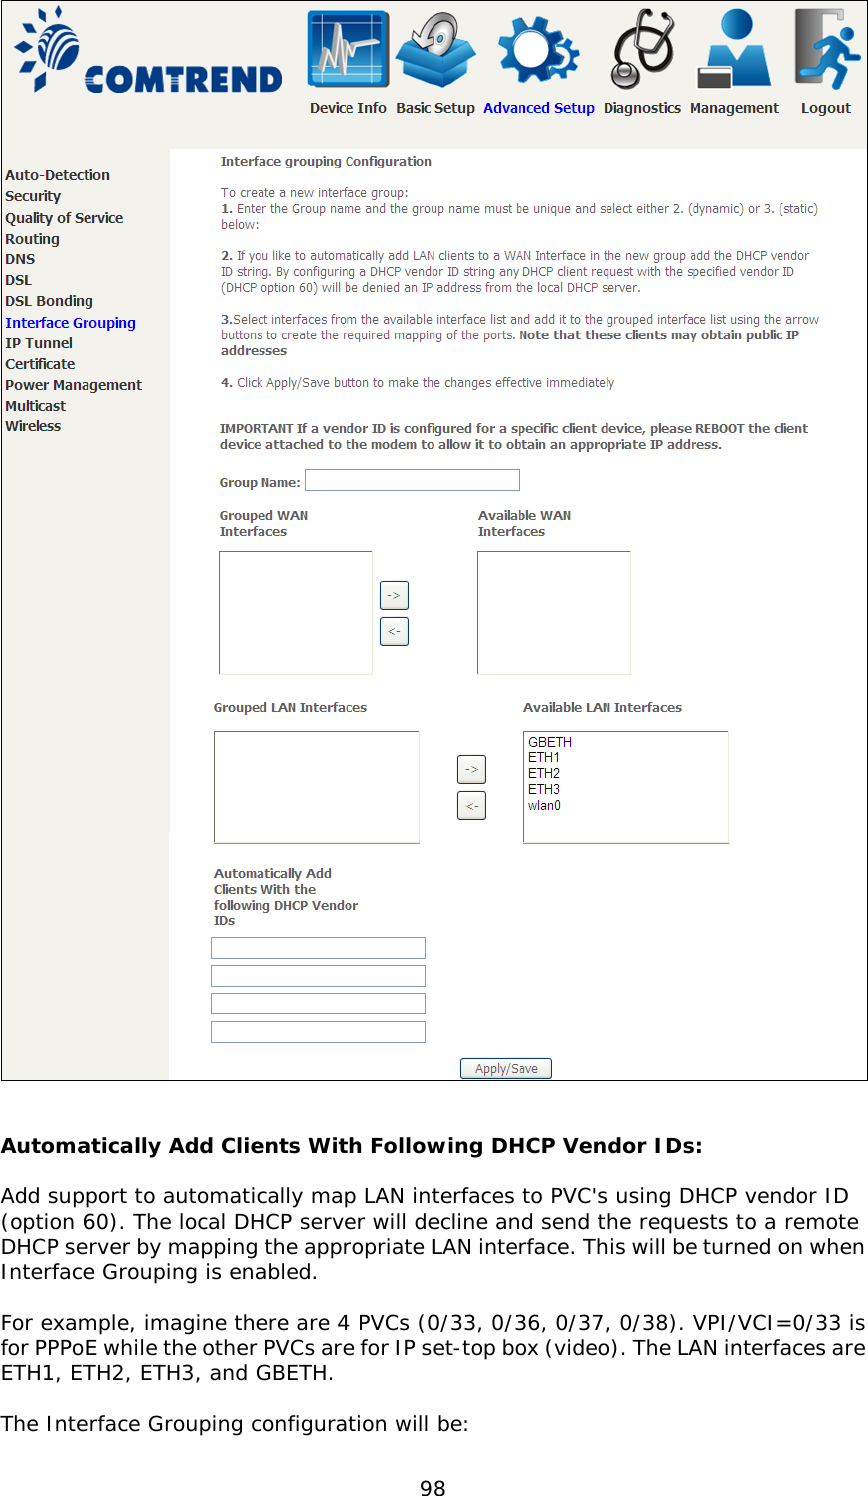  98    Automatically Add Clients With Following DHCP Vendor IDs:  Add support to automatically map LAN interfaces to PVC&apos;s using DHCP vendor ID (option 60). The local DHCP server will decline and send the requests to a remote DHCP server by mapping the appropriate LAN interface. This will be turned on when Interface Grouping is enabled.  For example, imagine there are 4 PVCs (0/33, 0/36, 0/37, 0/38). VPI/VCI=0/33 is for PPPoE while the other PVCs are for IP set-top box (video). The LAN interfaces are ETH1, ETH2, ETH3, and GBETH.  The Interface Grouping configuration will be: 